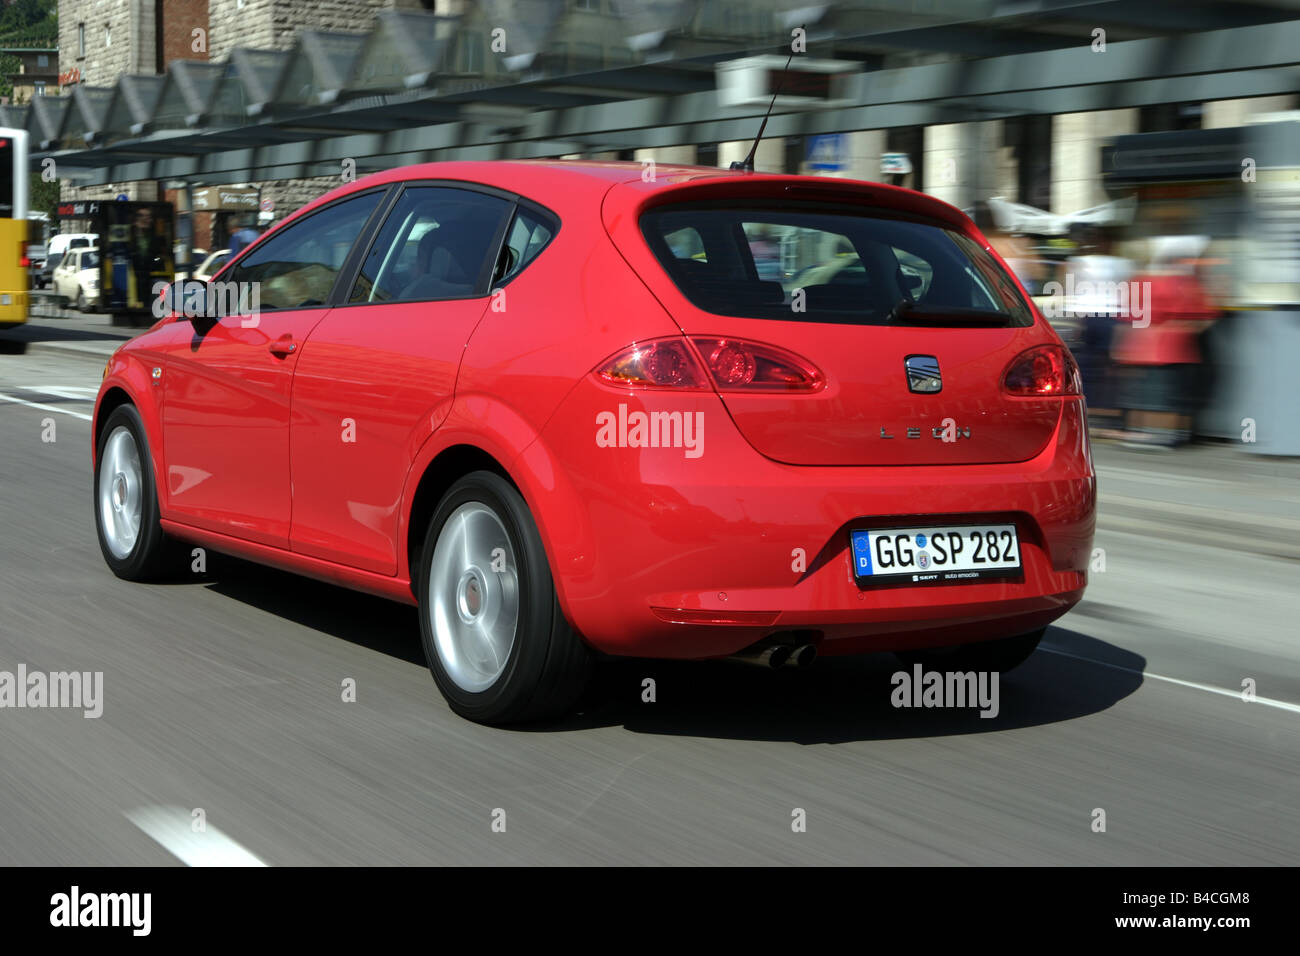 Seat Leon 2.0 FSI, model year 2005-, red, driving, diagonal from the back, rear view, City Stock Photo